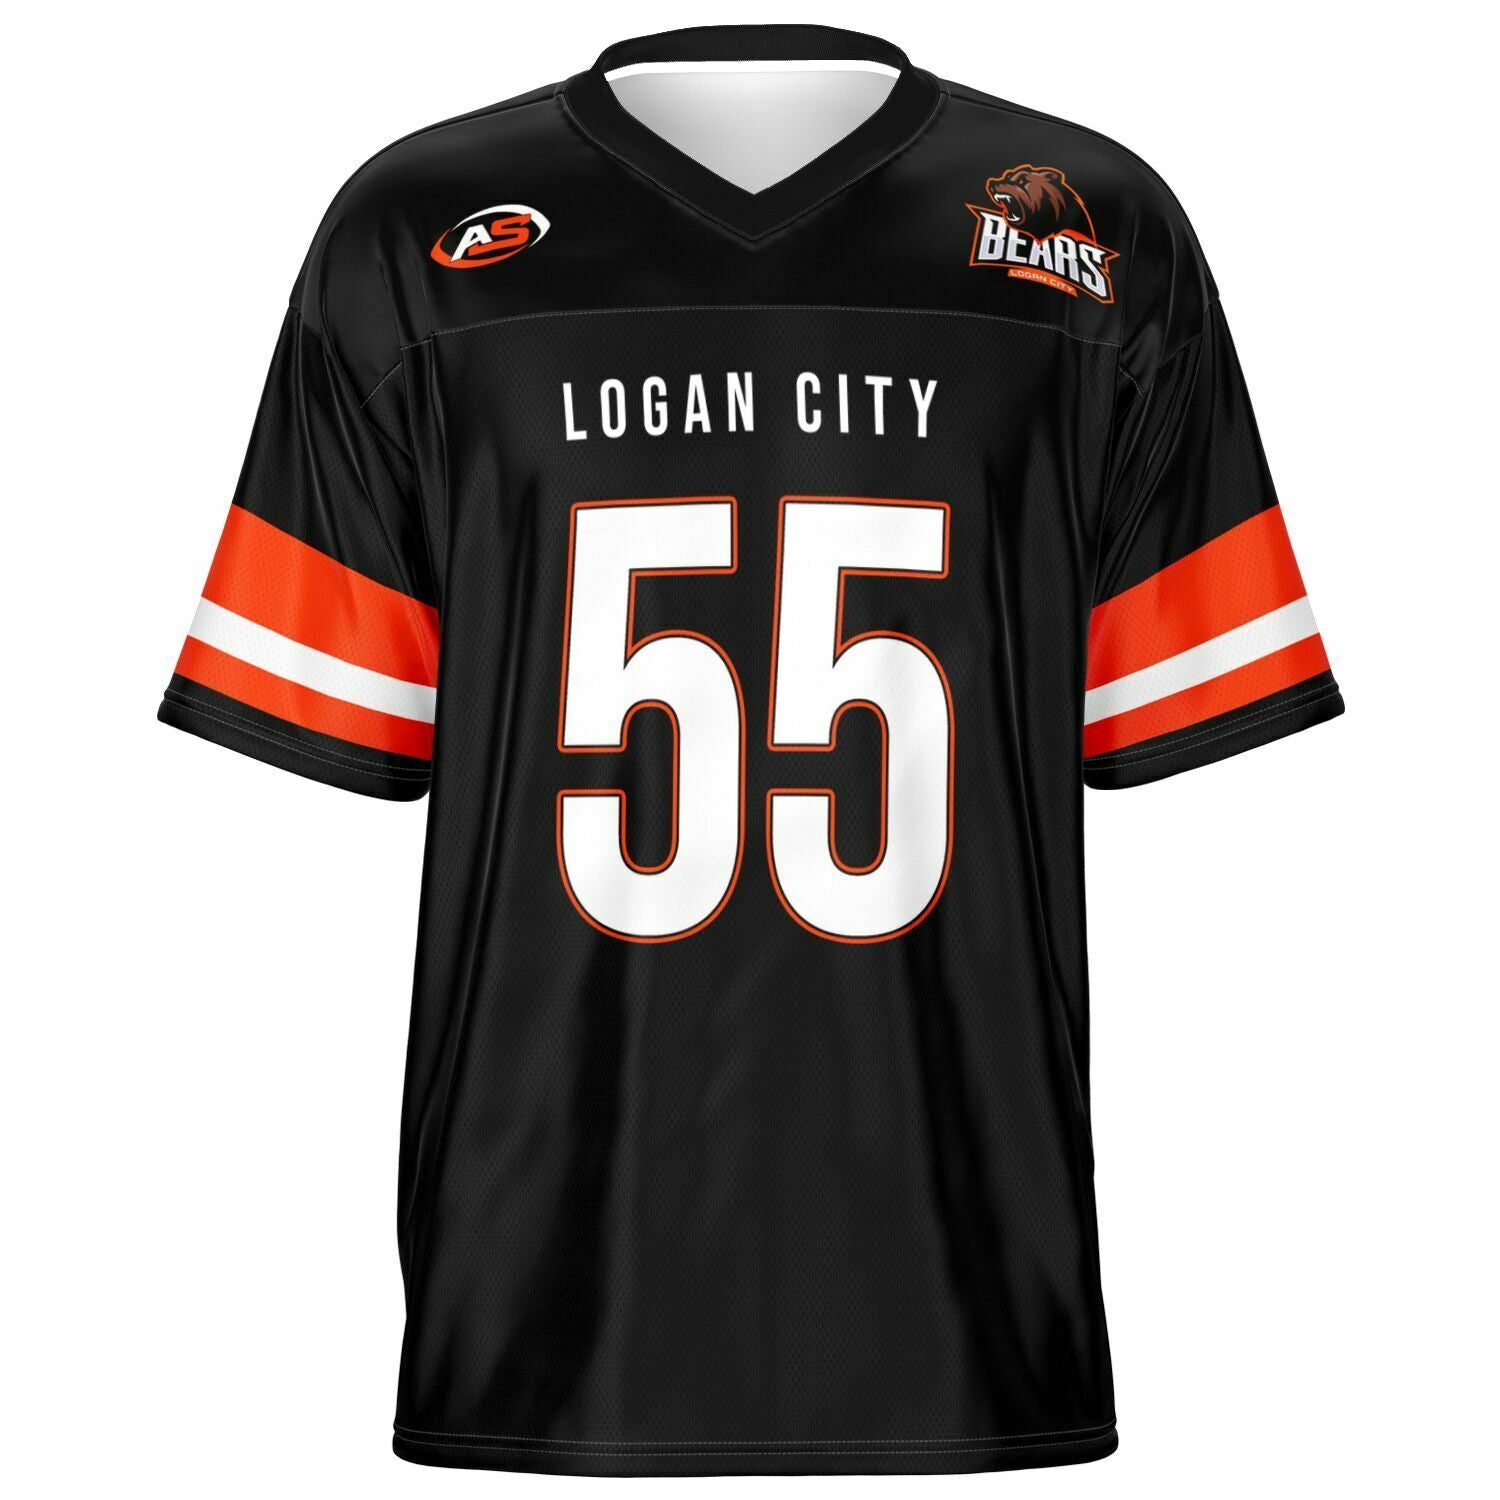 Logan City Bears Home Supporters Jersey